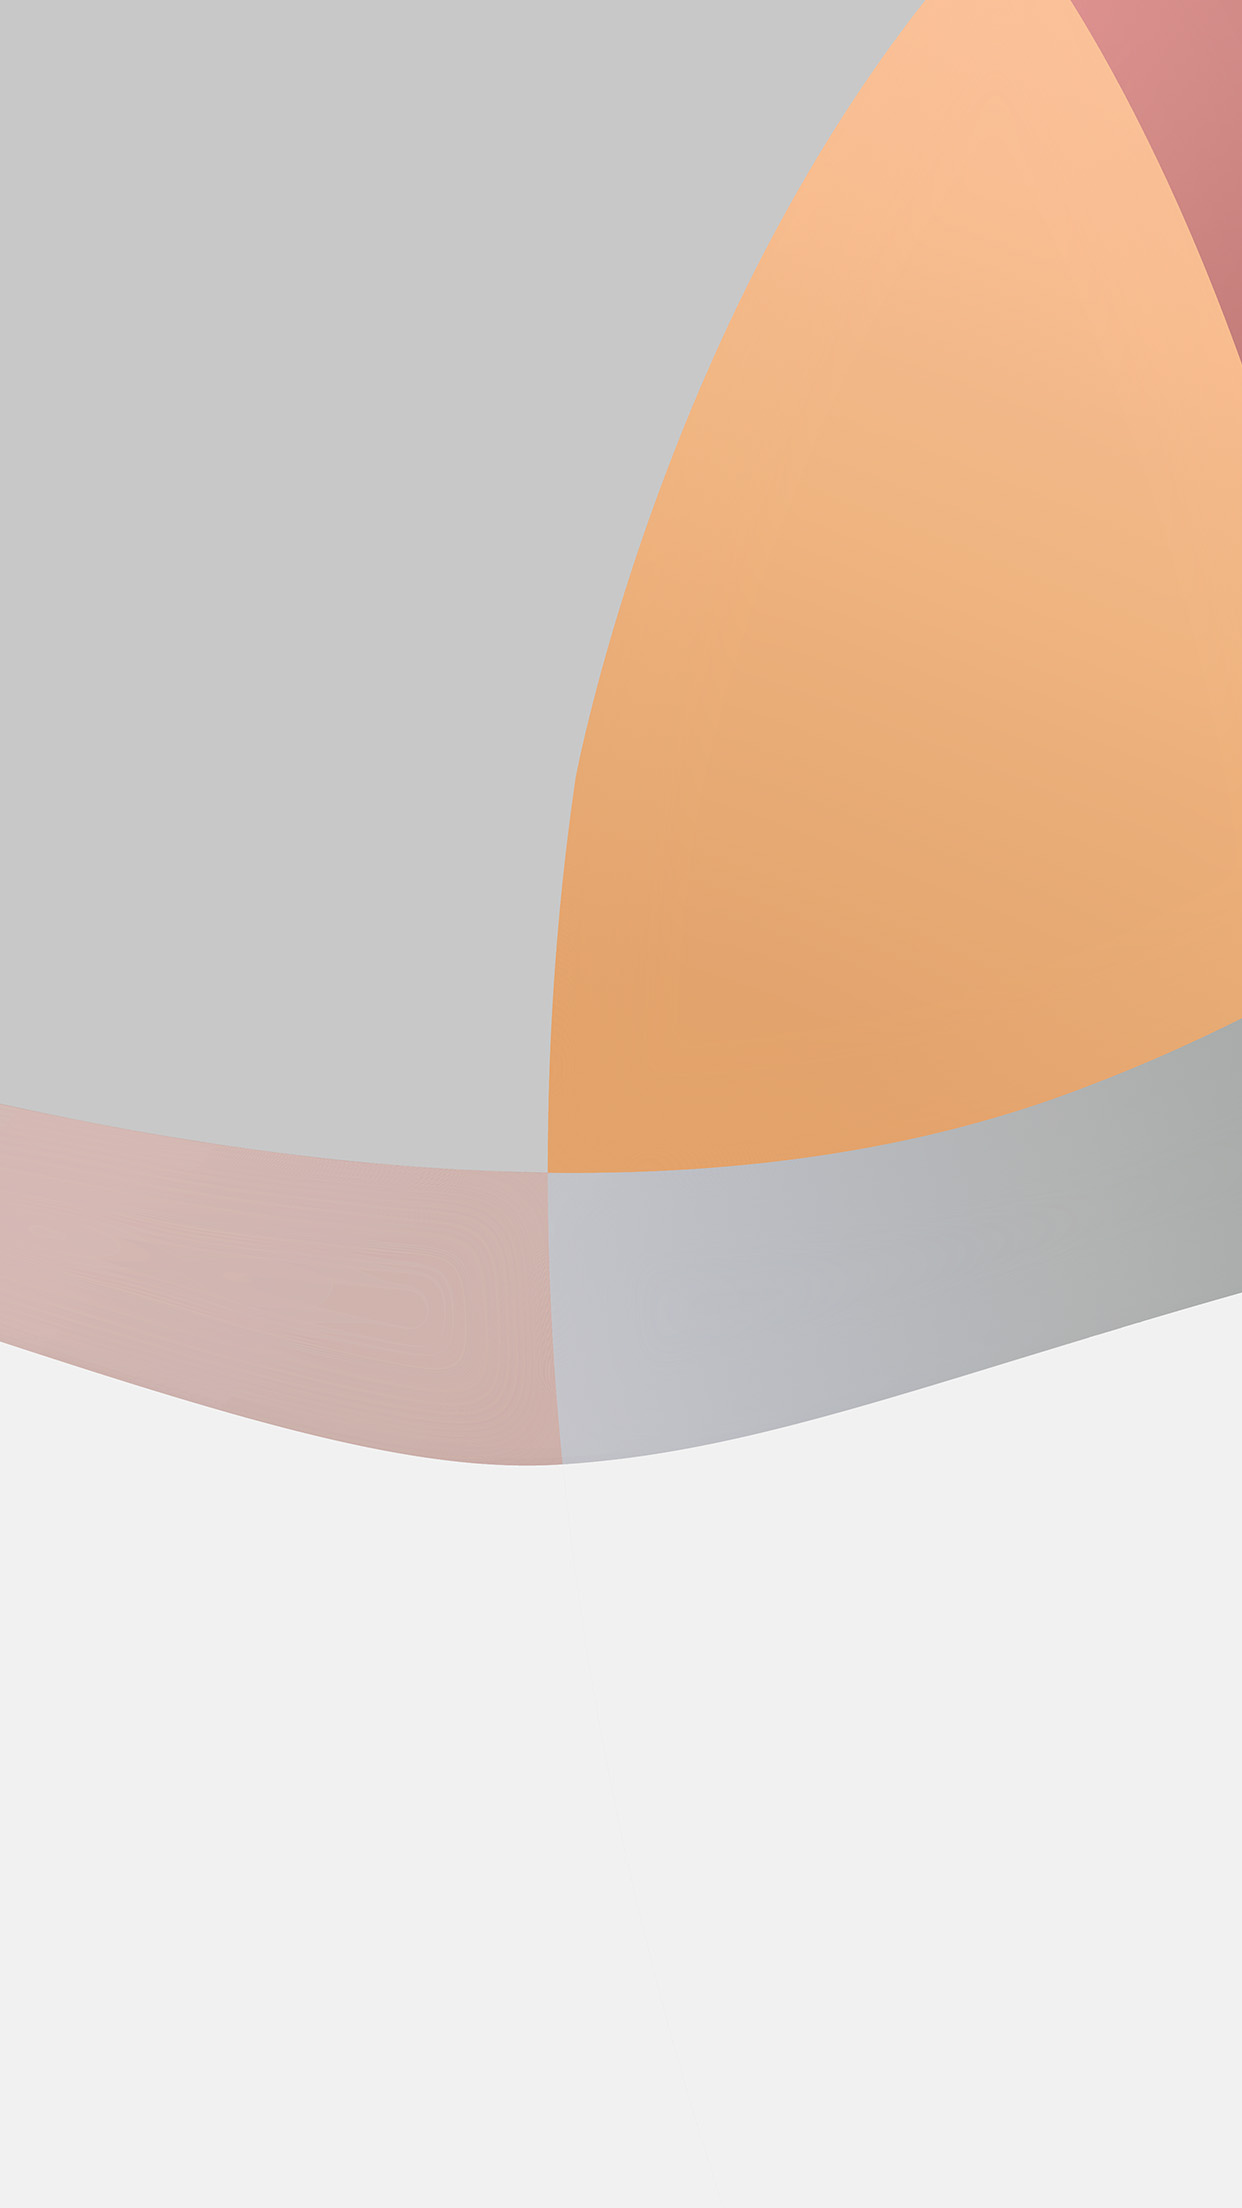 Apple Event March 2016 Art Logo Pattern Simple Orange Android wallpaper